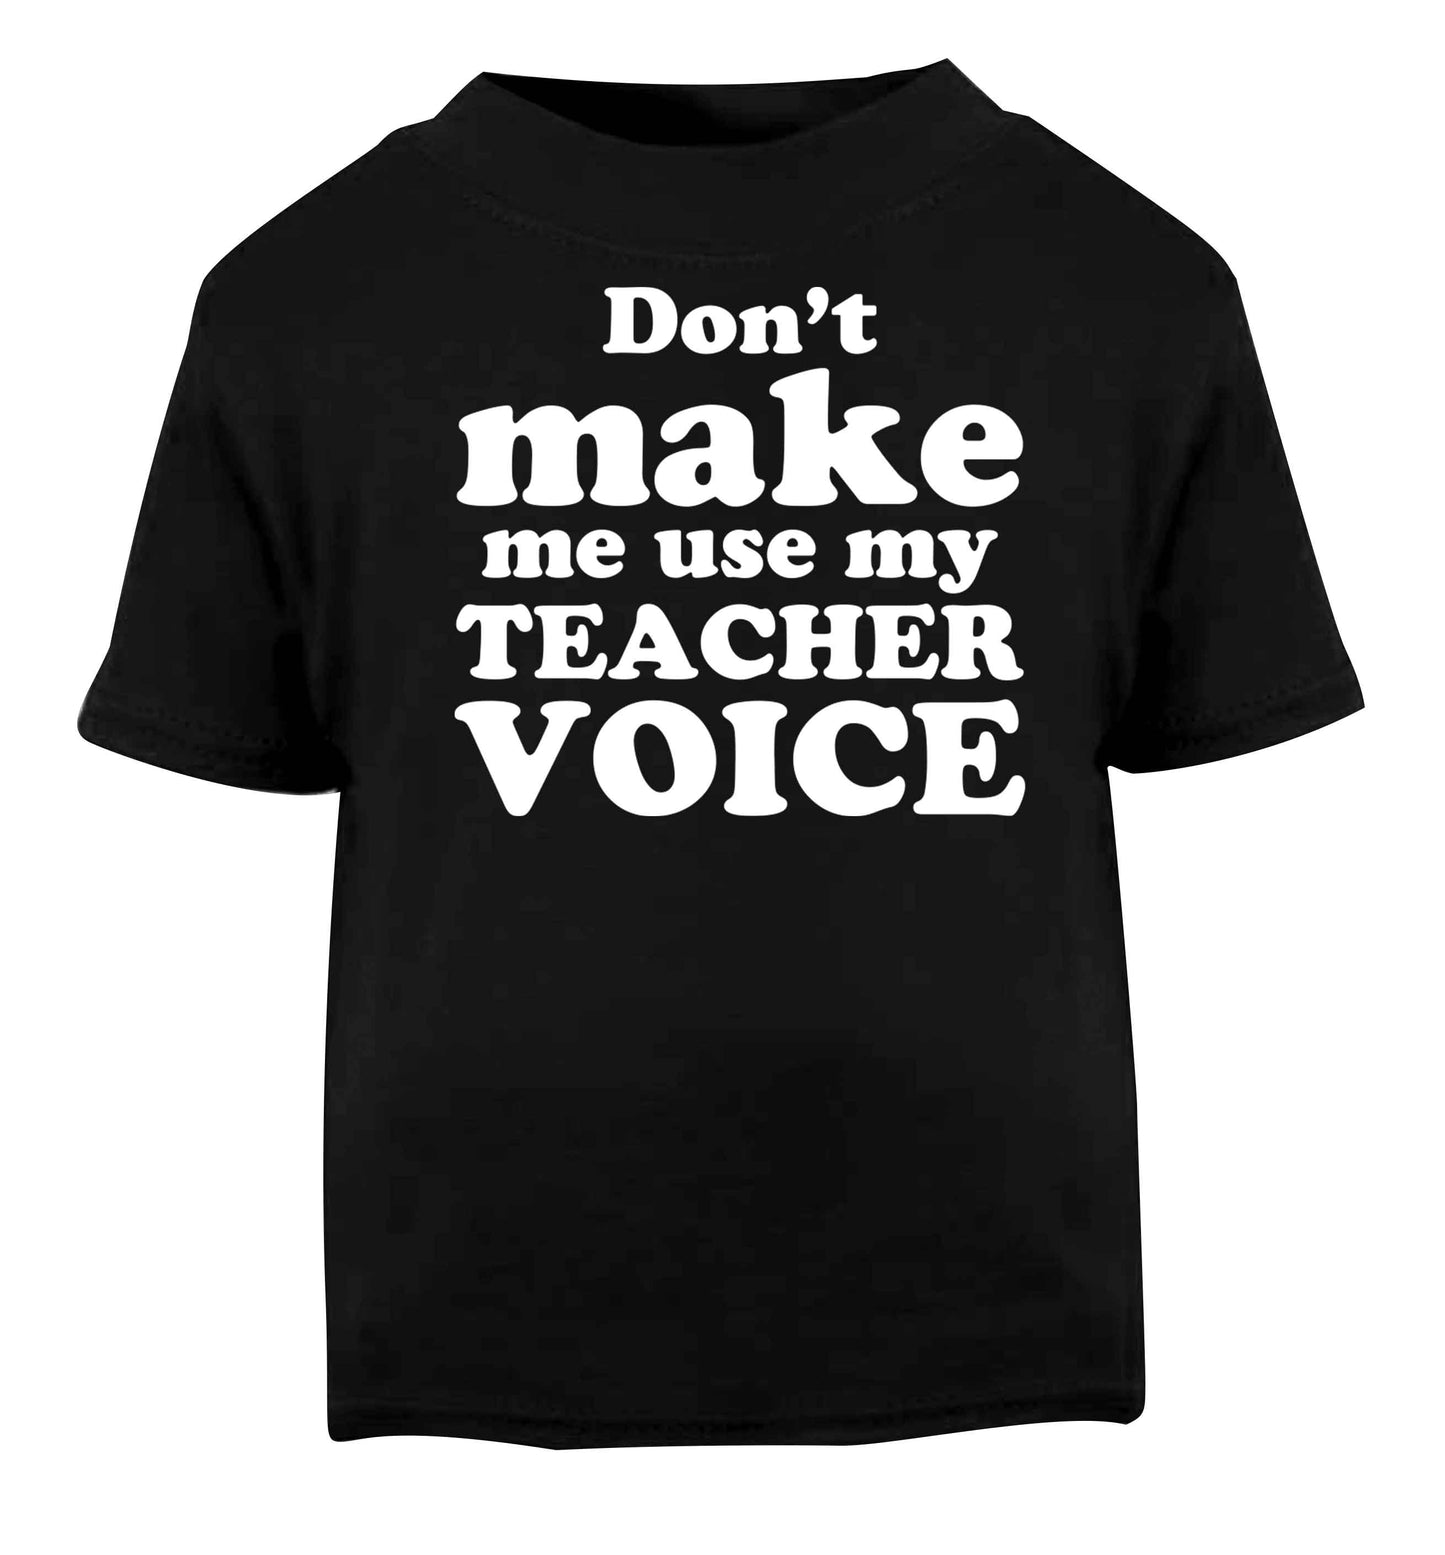 Don't make me use my teacher voice Black baby toddler Tshirt 2 years